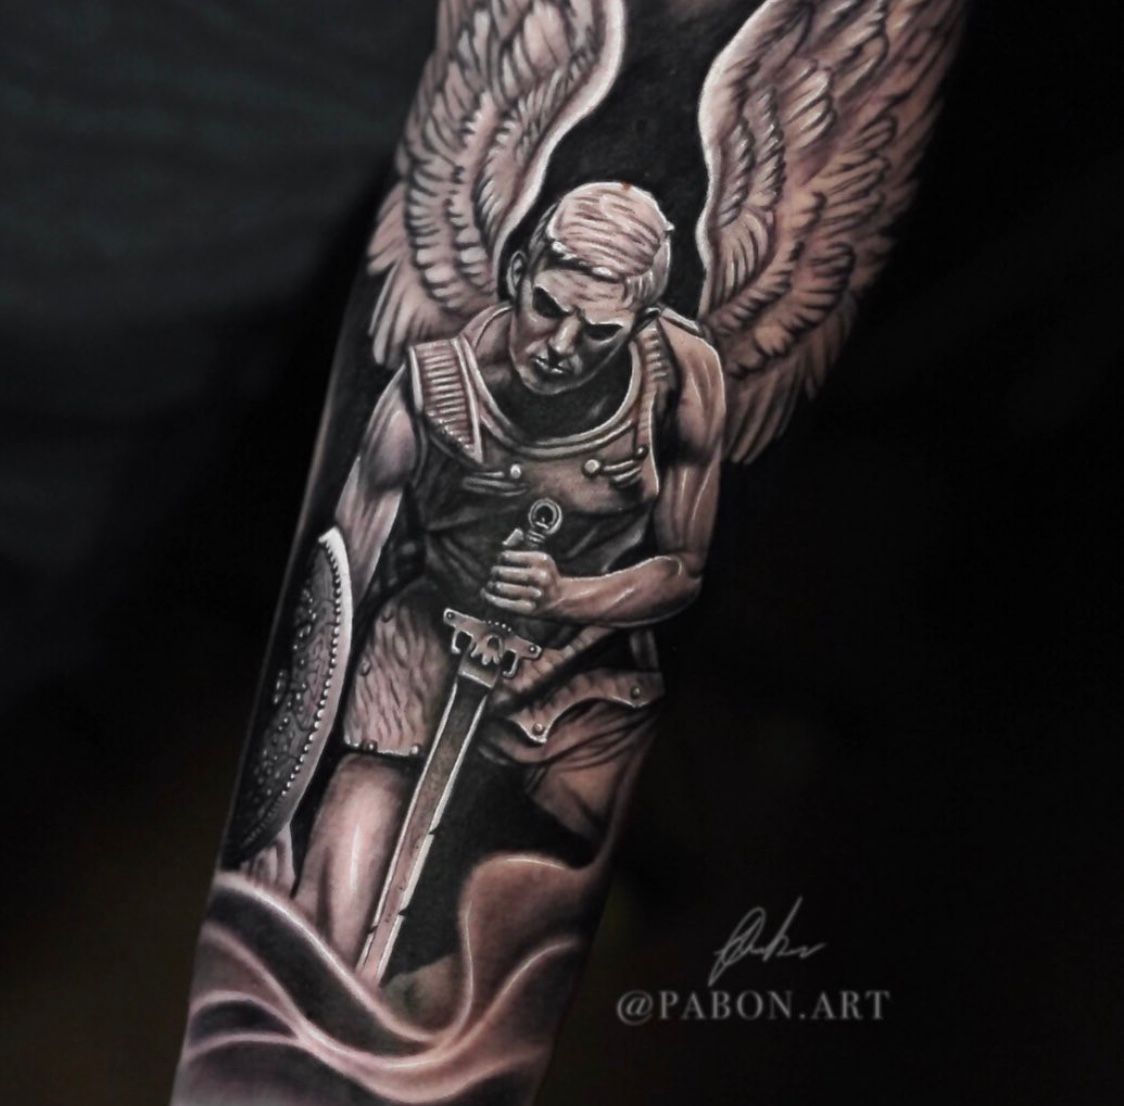 Angel tattoo - time lapse - YouTube